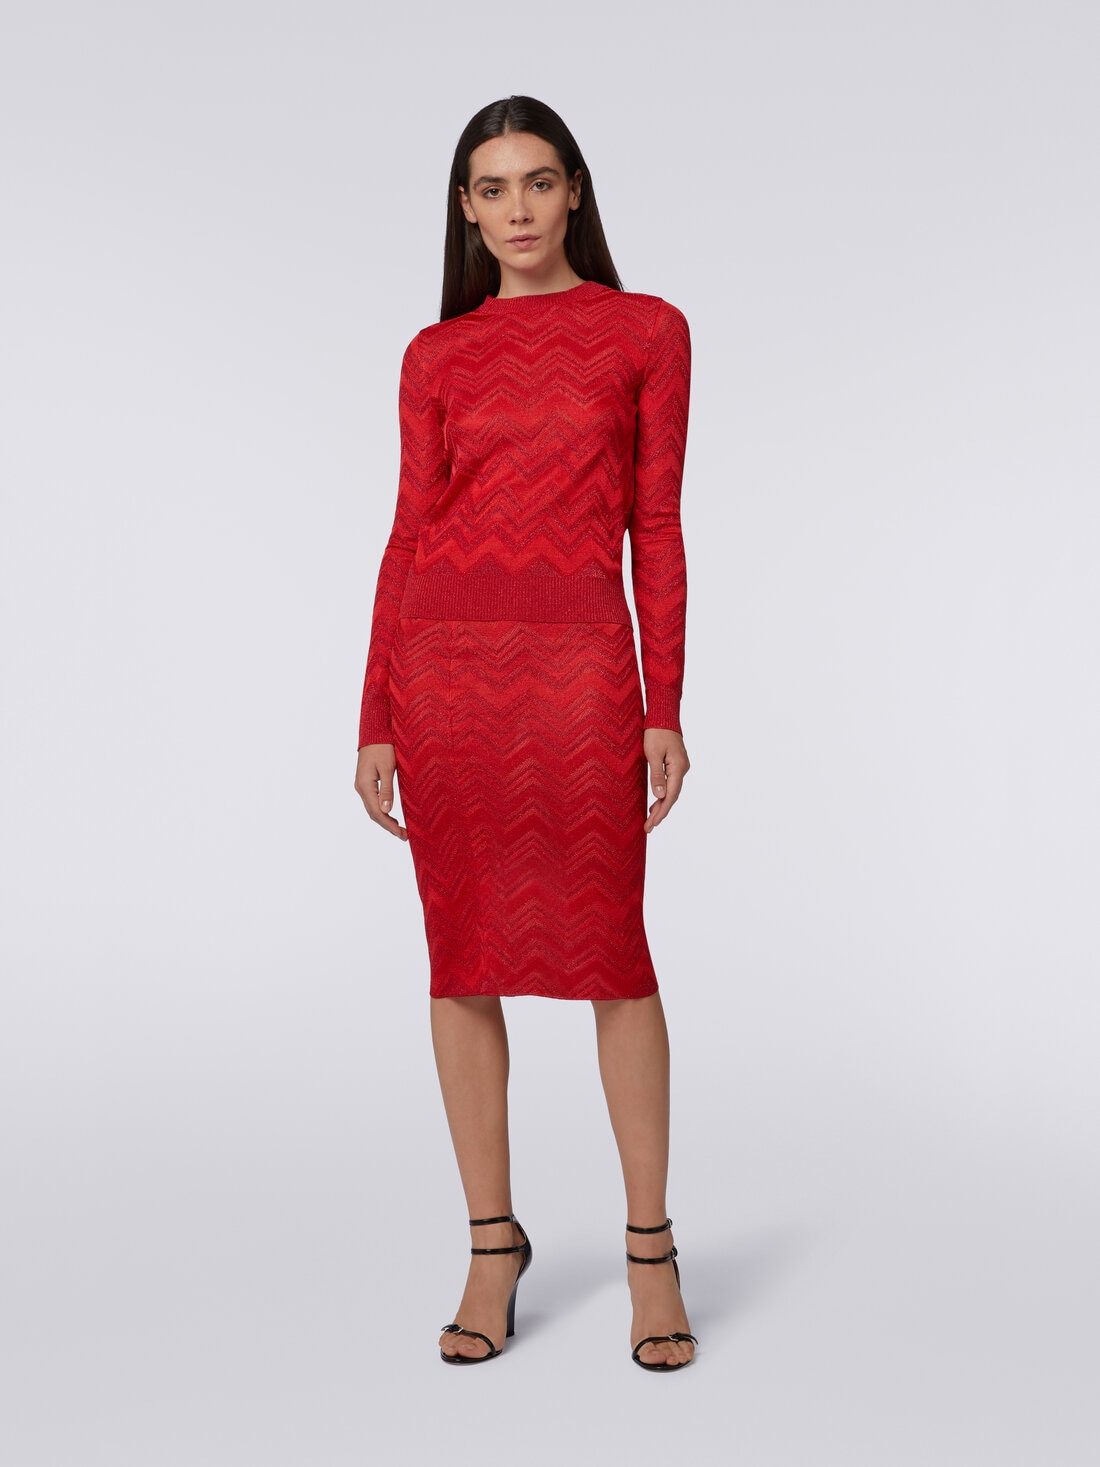 Longuette skirt in zigzag knit with lurex, Red  - DS24SH0TBK034J81756 - 1